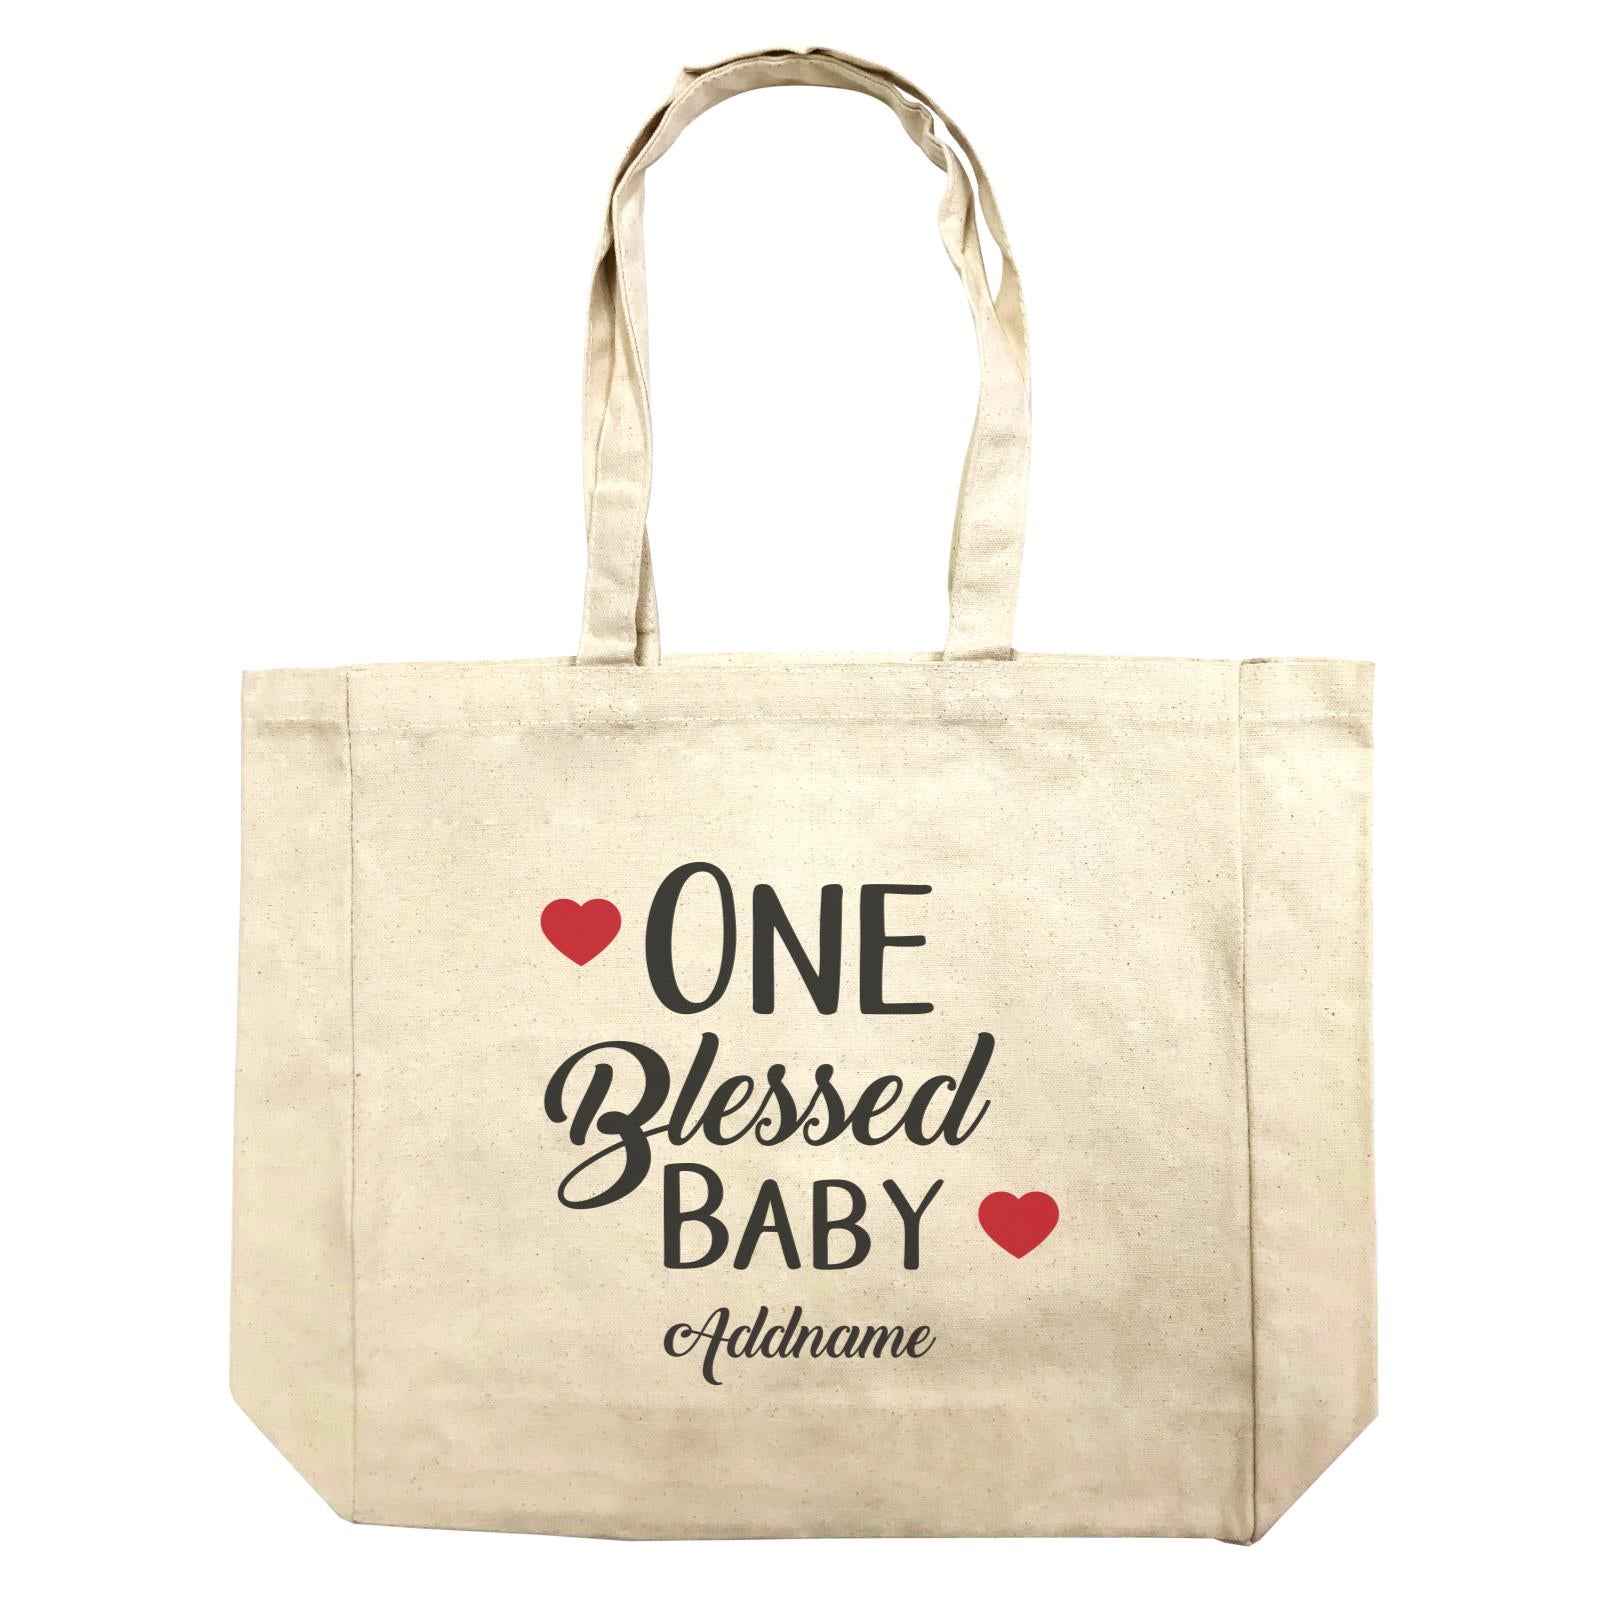 Christian Series One Blessed Baby Addname Shopping Bag